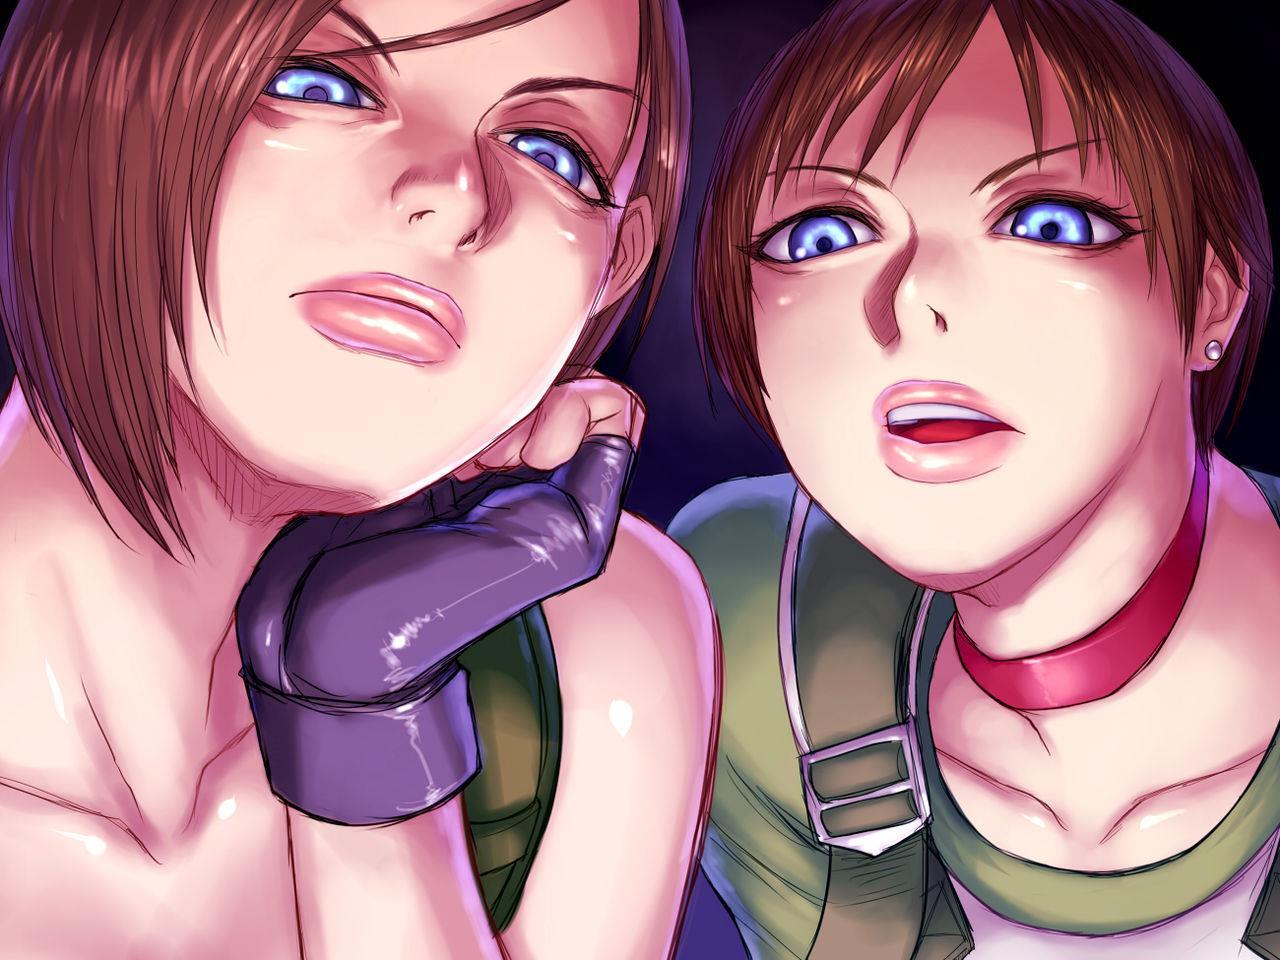 Jill Valentine & Rebecca Chambers - Chatroulette Extended 2